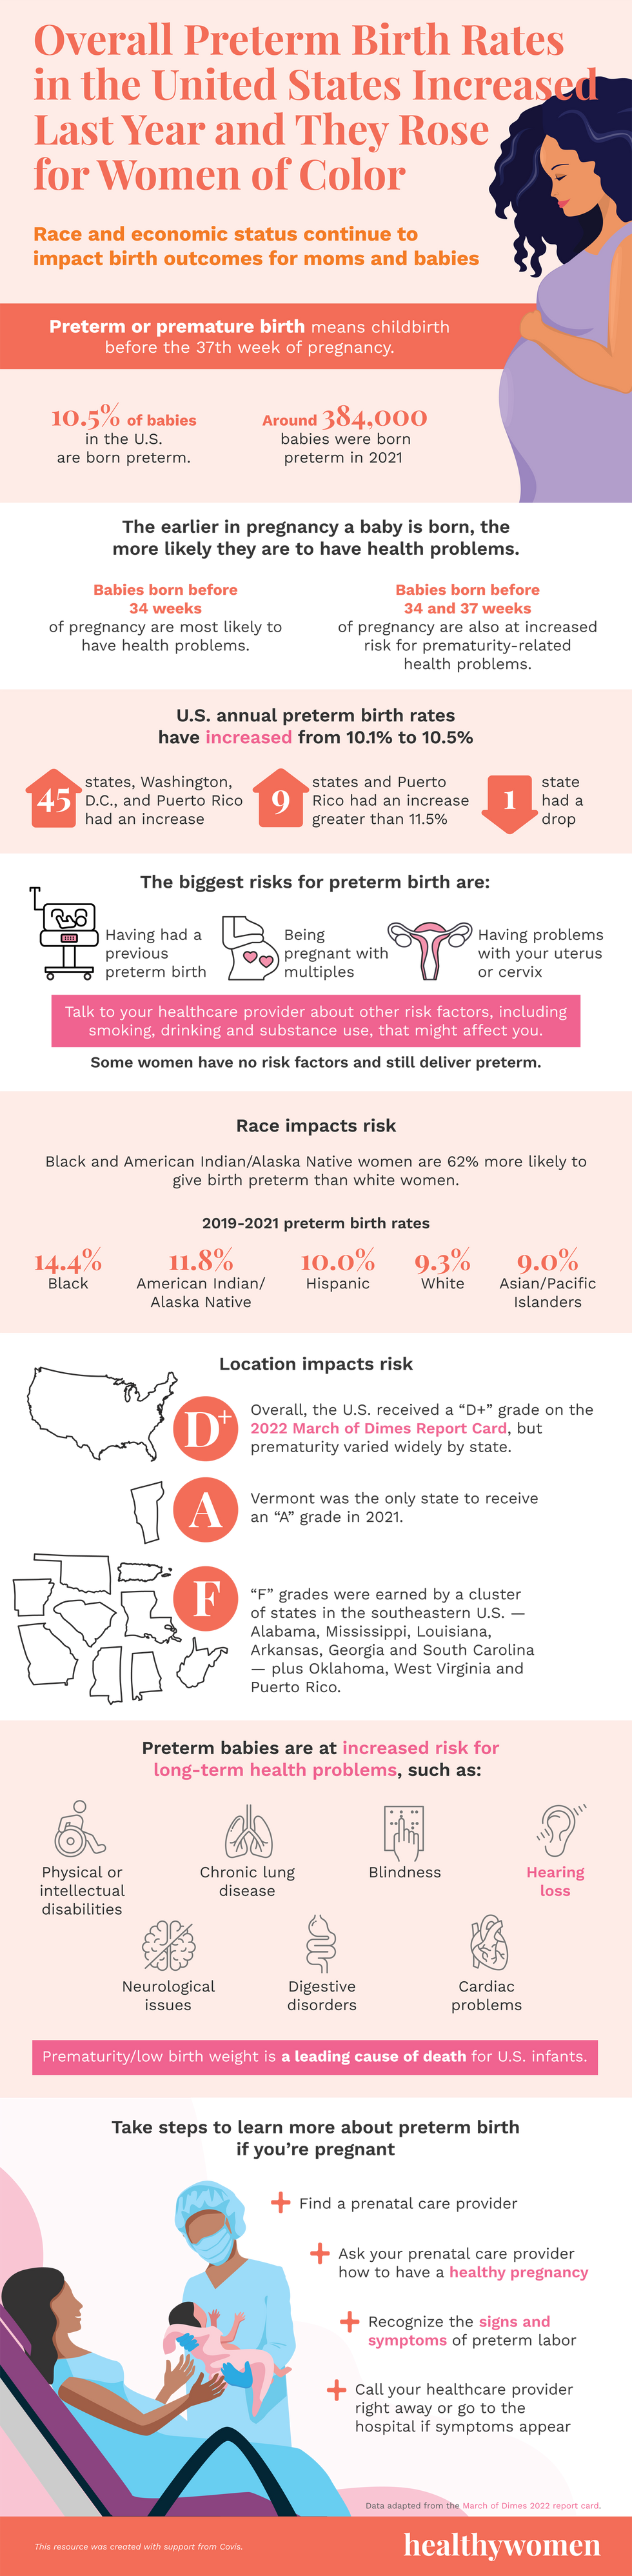 Infographic Overall Preterm Birth Rates in the United States Increased Last Year \u2014 And They Rose for Women of Color. Click the image to open the PDF